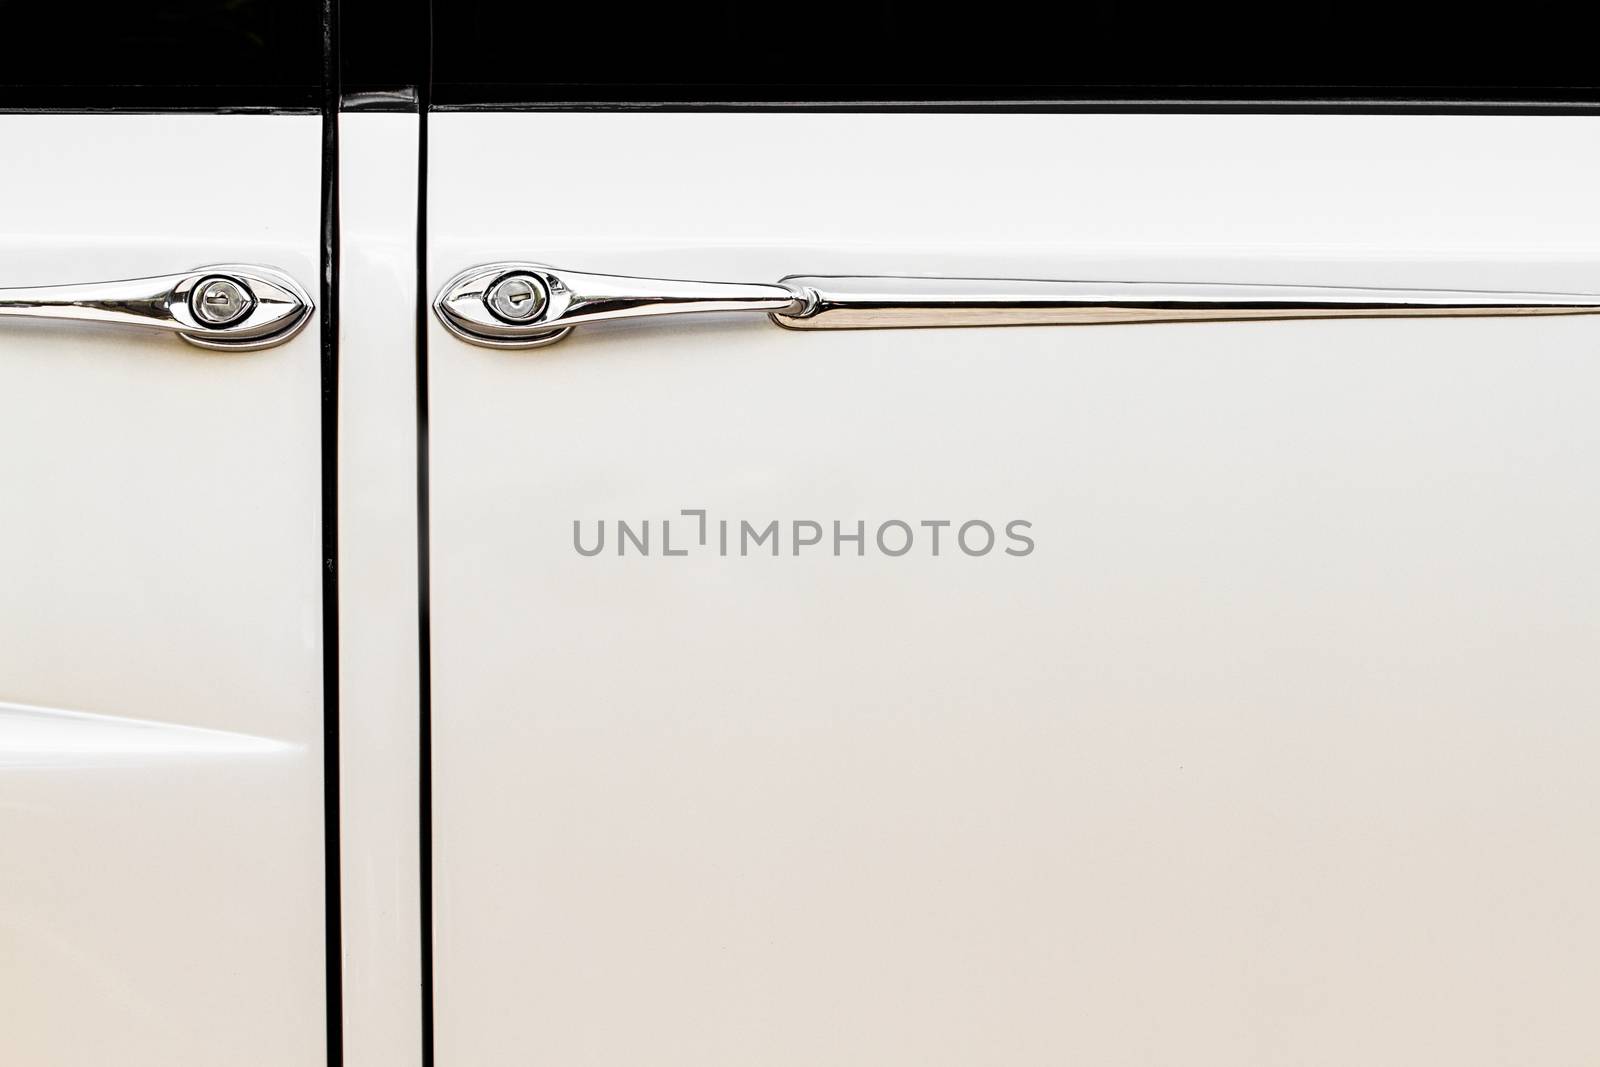 Luxurious and Vintage Beige Car Doors and Handle Detail